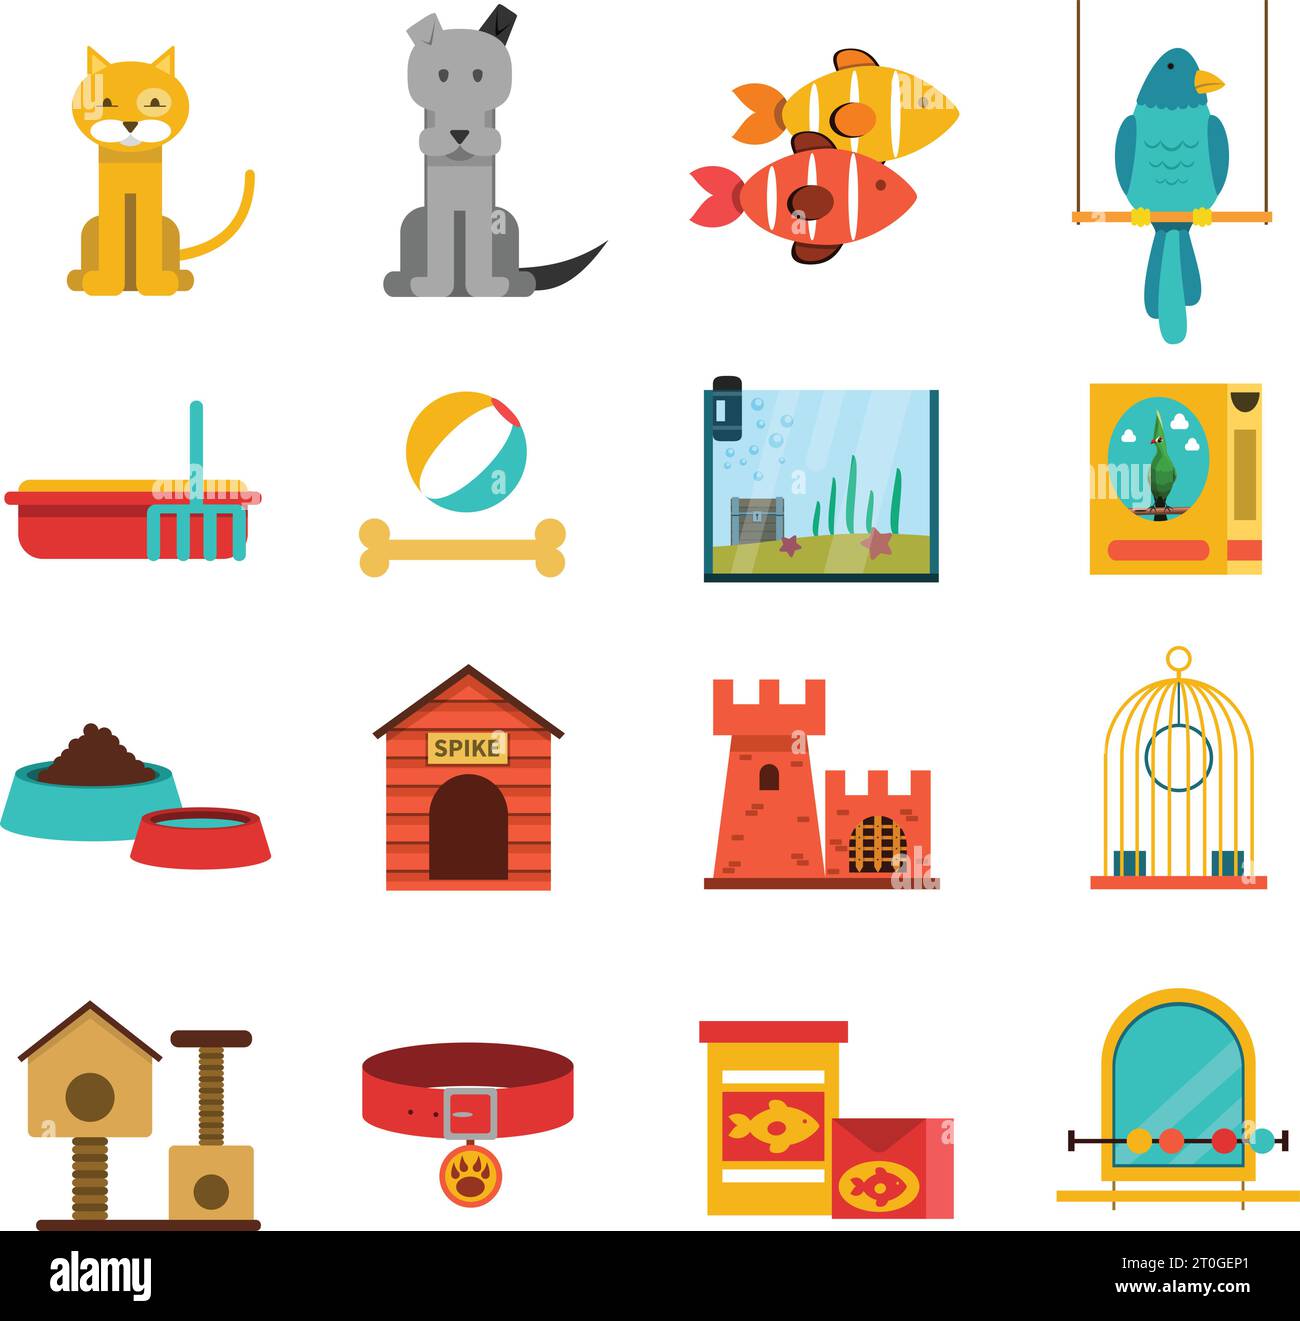 Pets flat icons set with cat dog fishes and bird isolated vector illustration Stock Vector